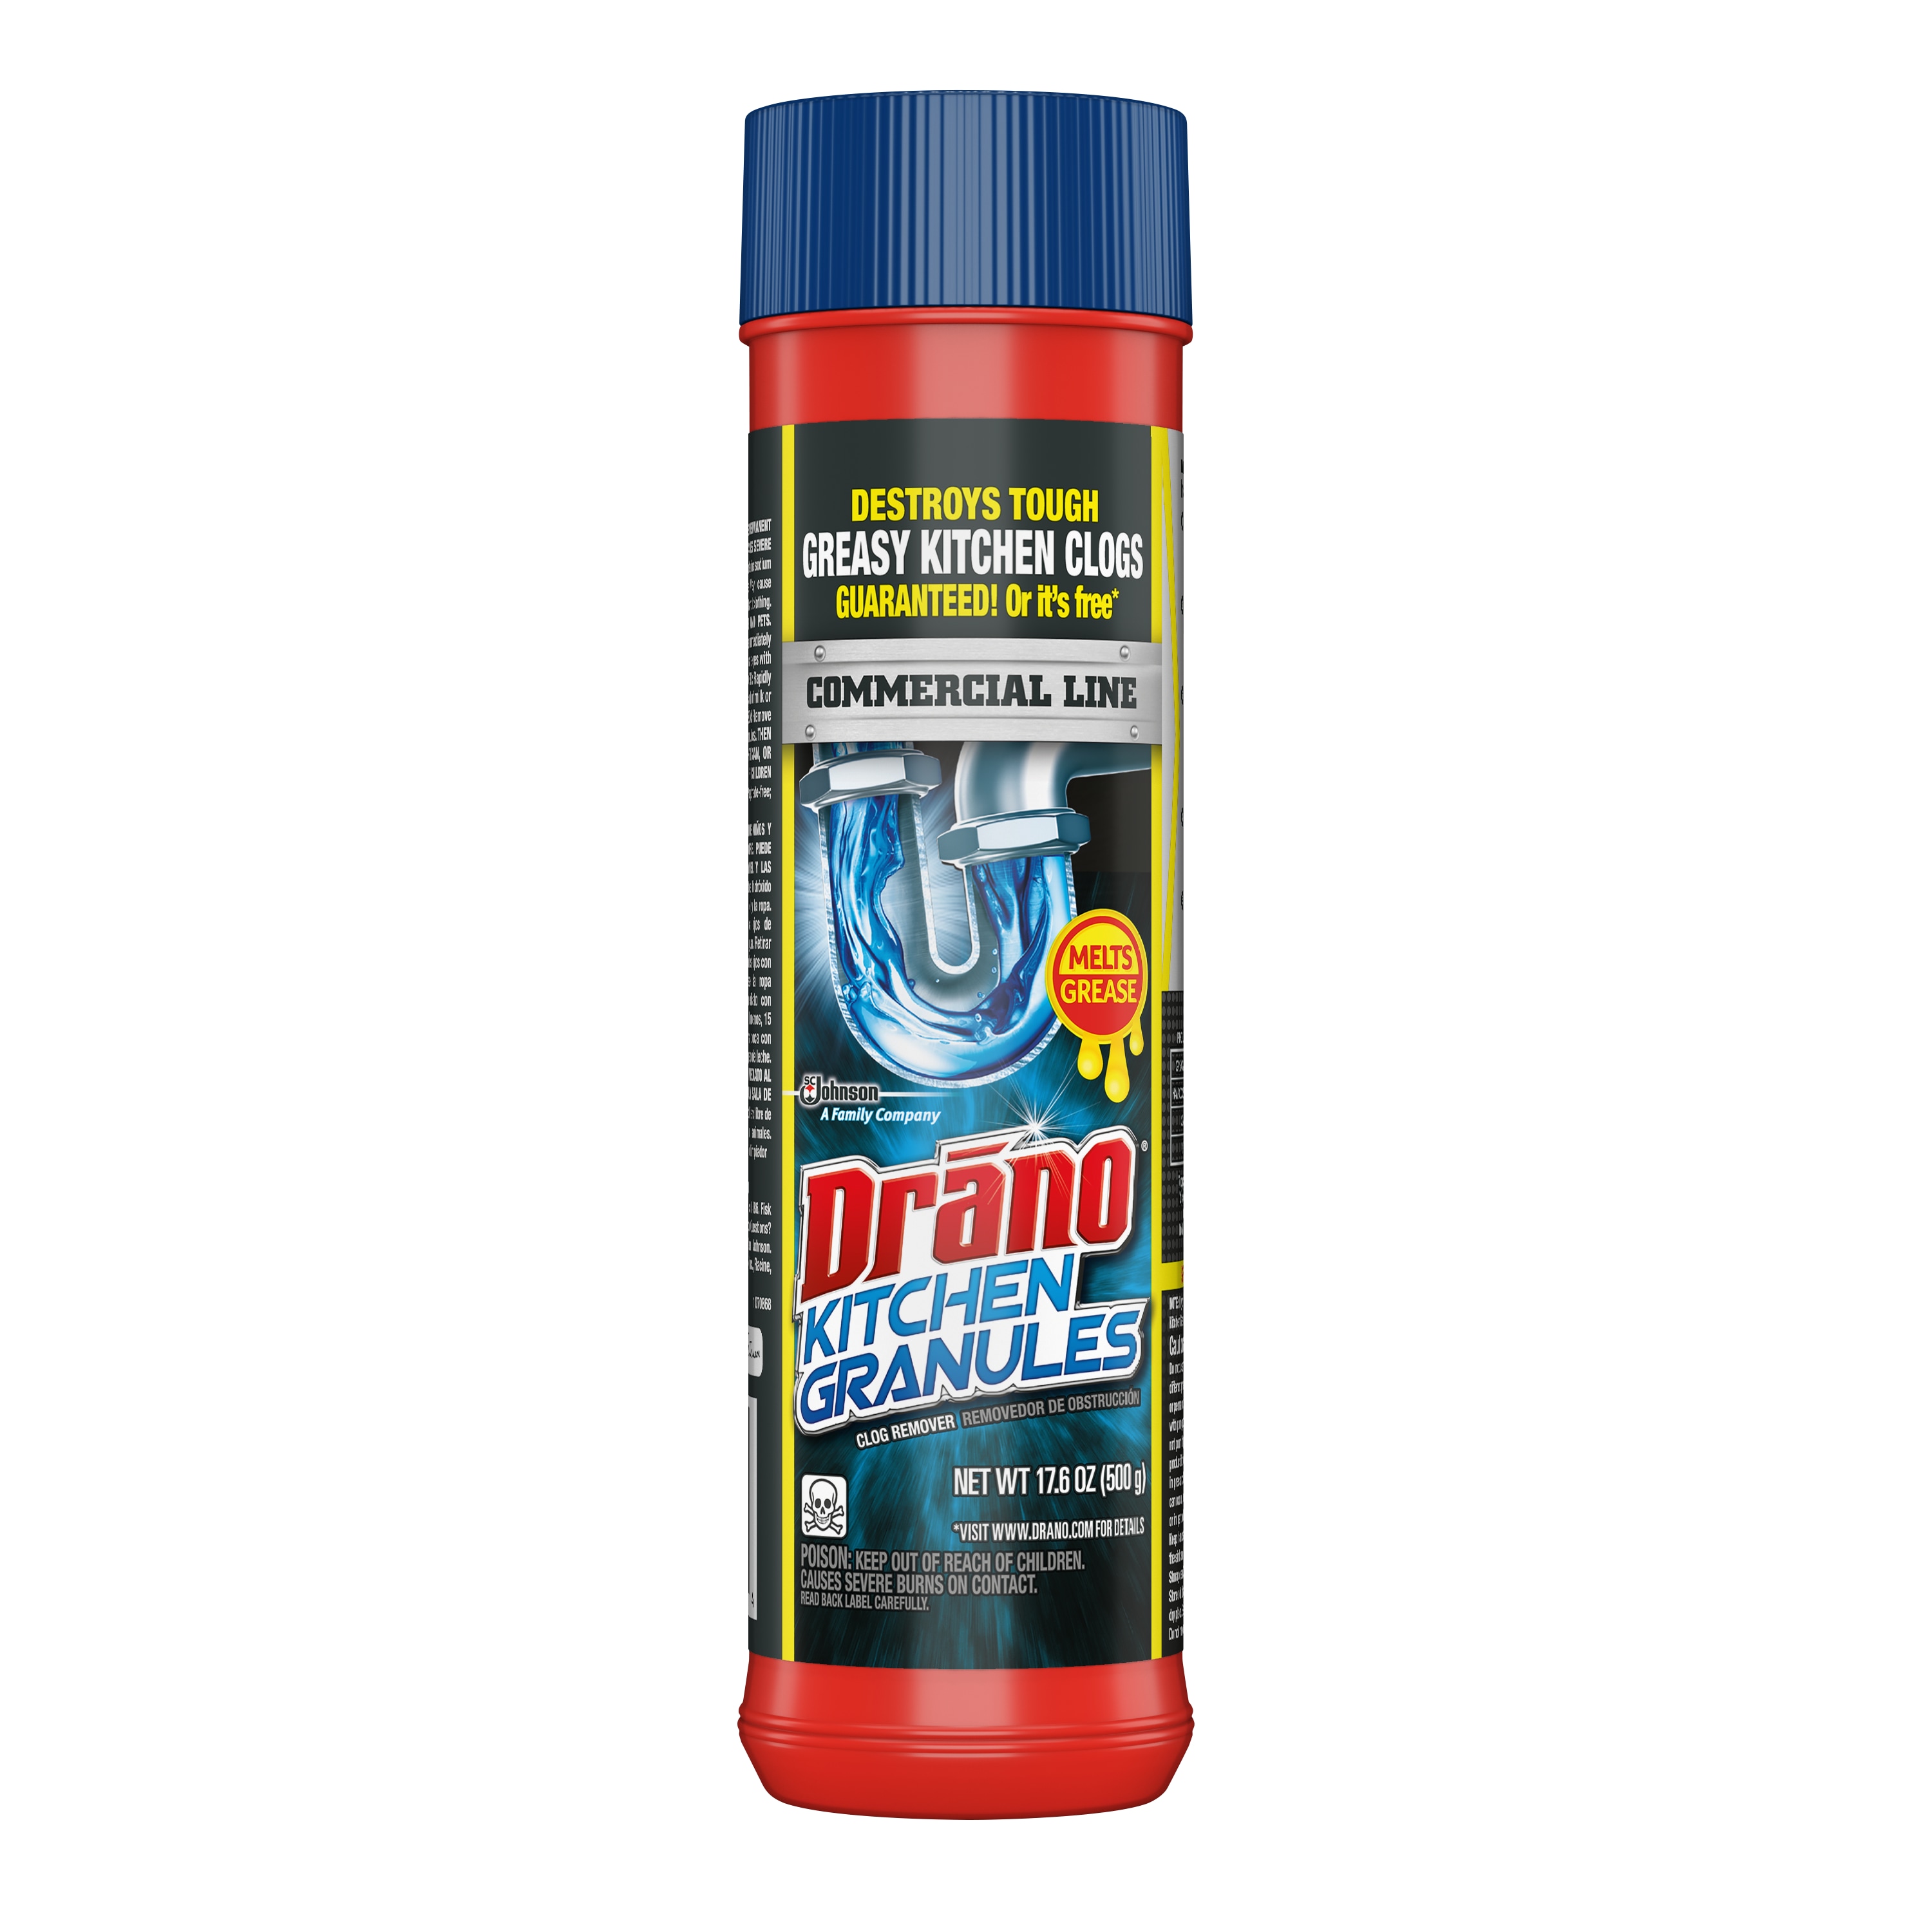 Drano Max Gel Clog Remover 32oz : Cleaning fast delivery by App or Online